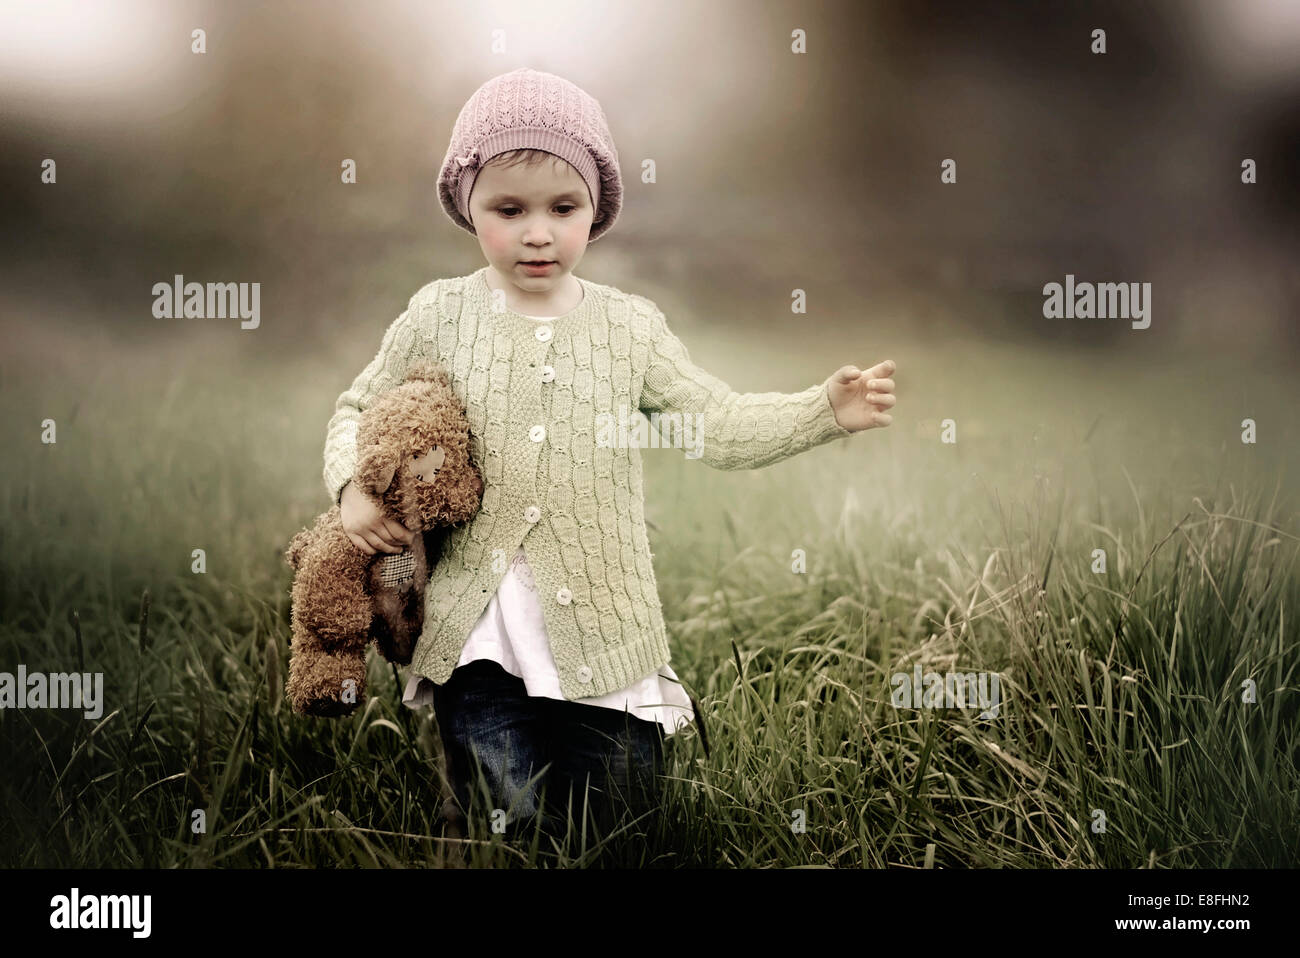 Girl holding teddy while running Stock Photo